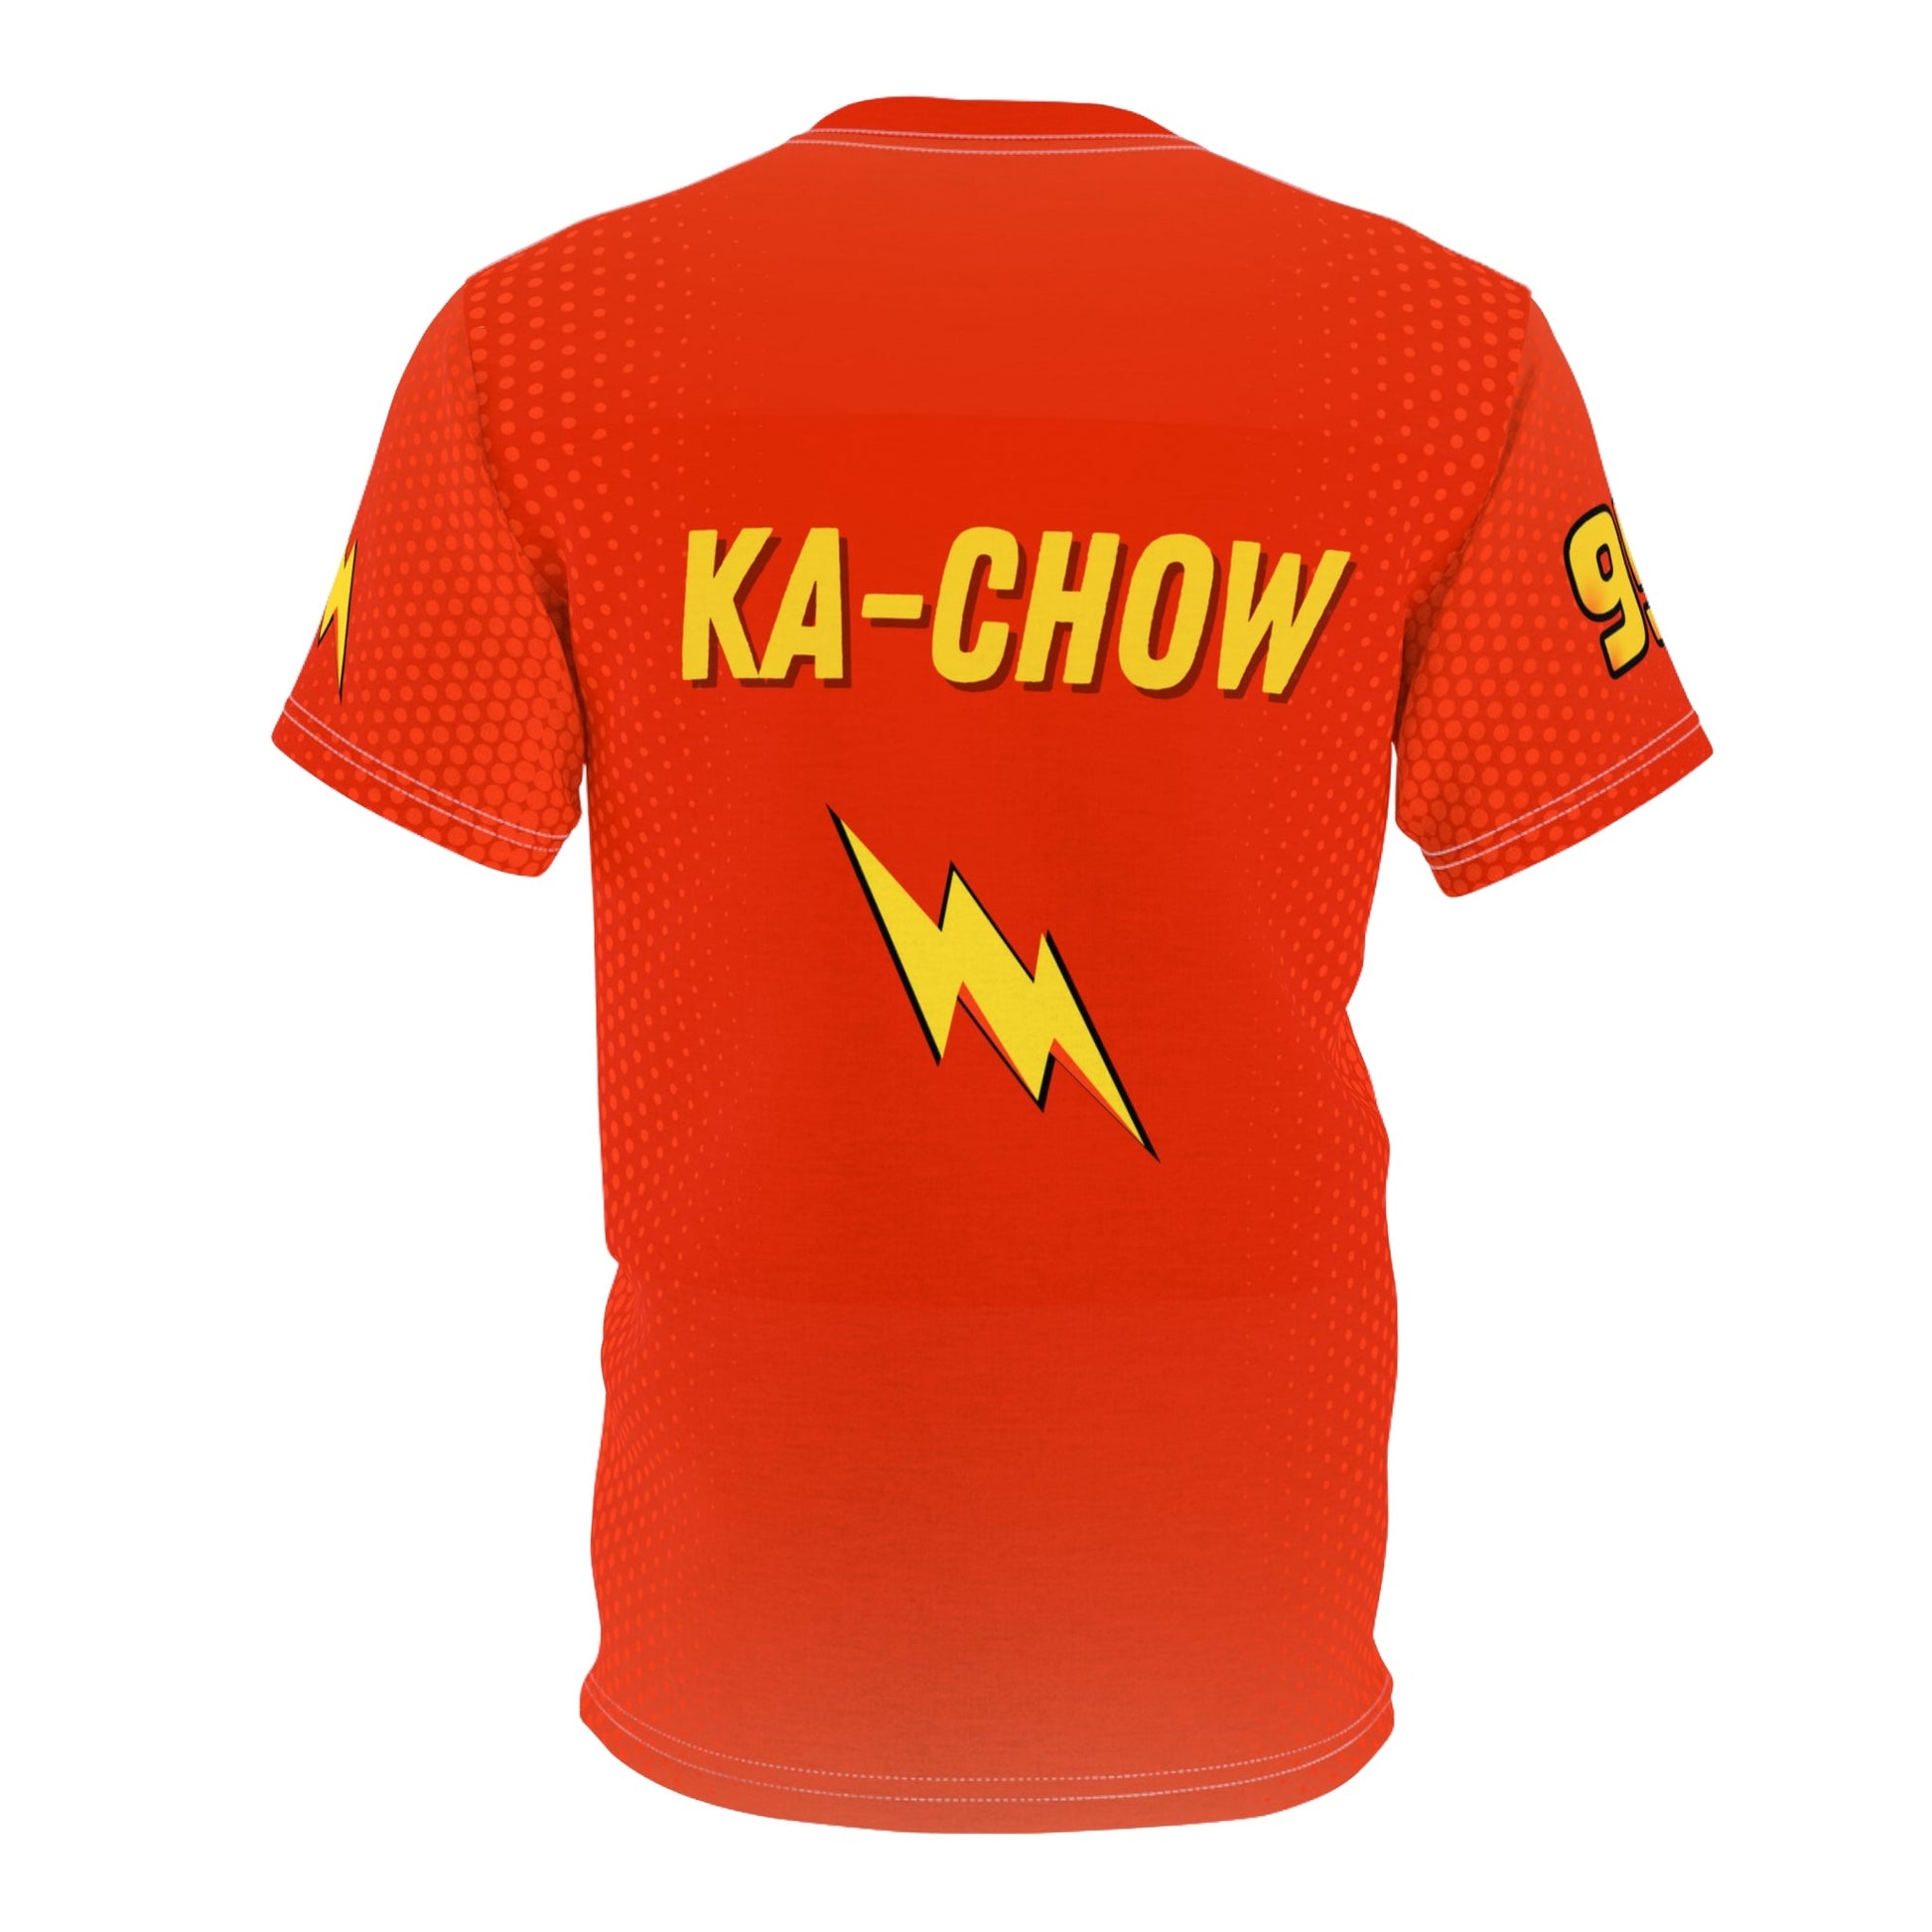 Kachow Unisex Tee adult disneyAll Over PrintAll Over PrintsLittle Lady Shay Boutique